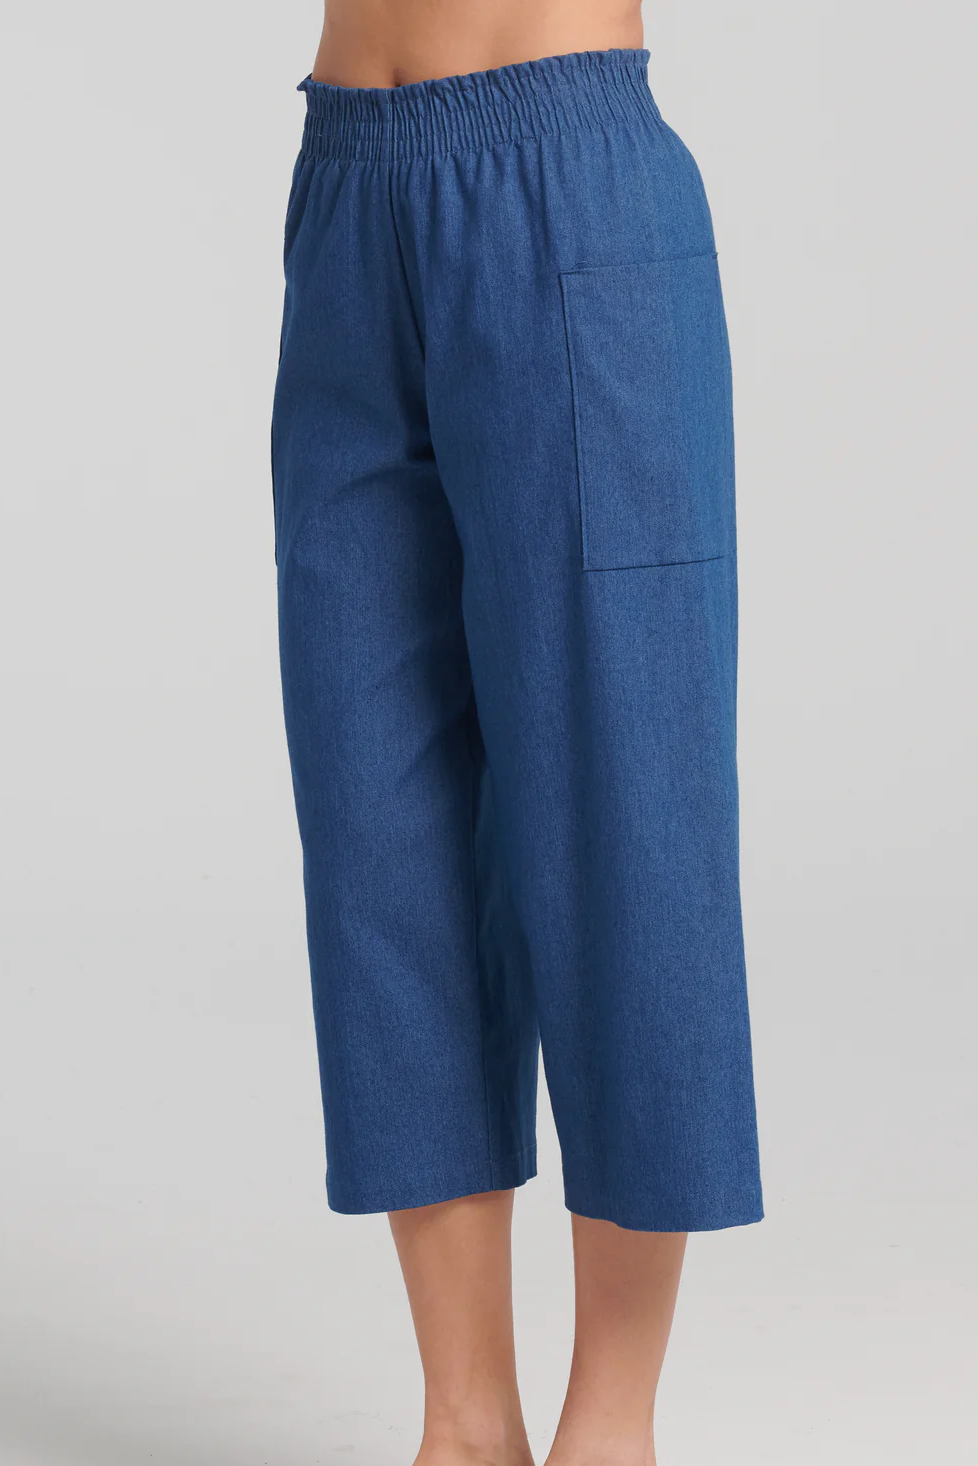 Anona Pants by Kollontai, Blue, lightweight denim, cropped length, elastic waist, side pouch pockets, sizes XS to XXL, made in Montreal 